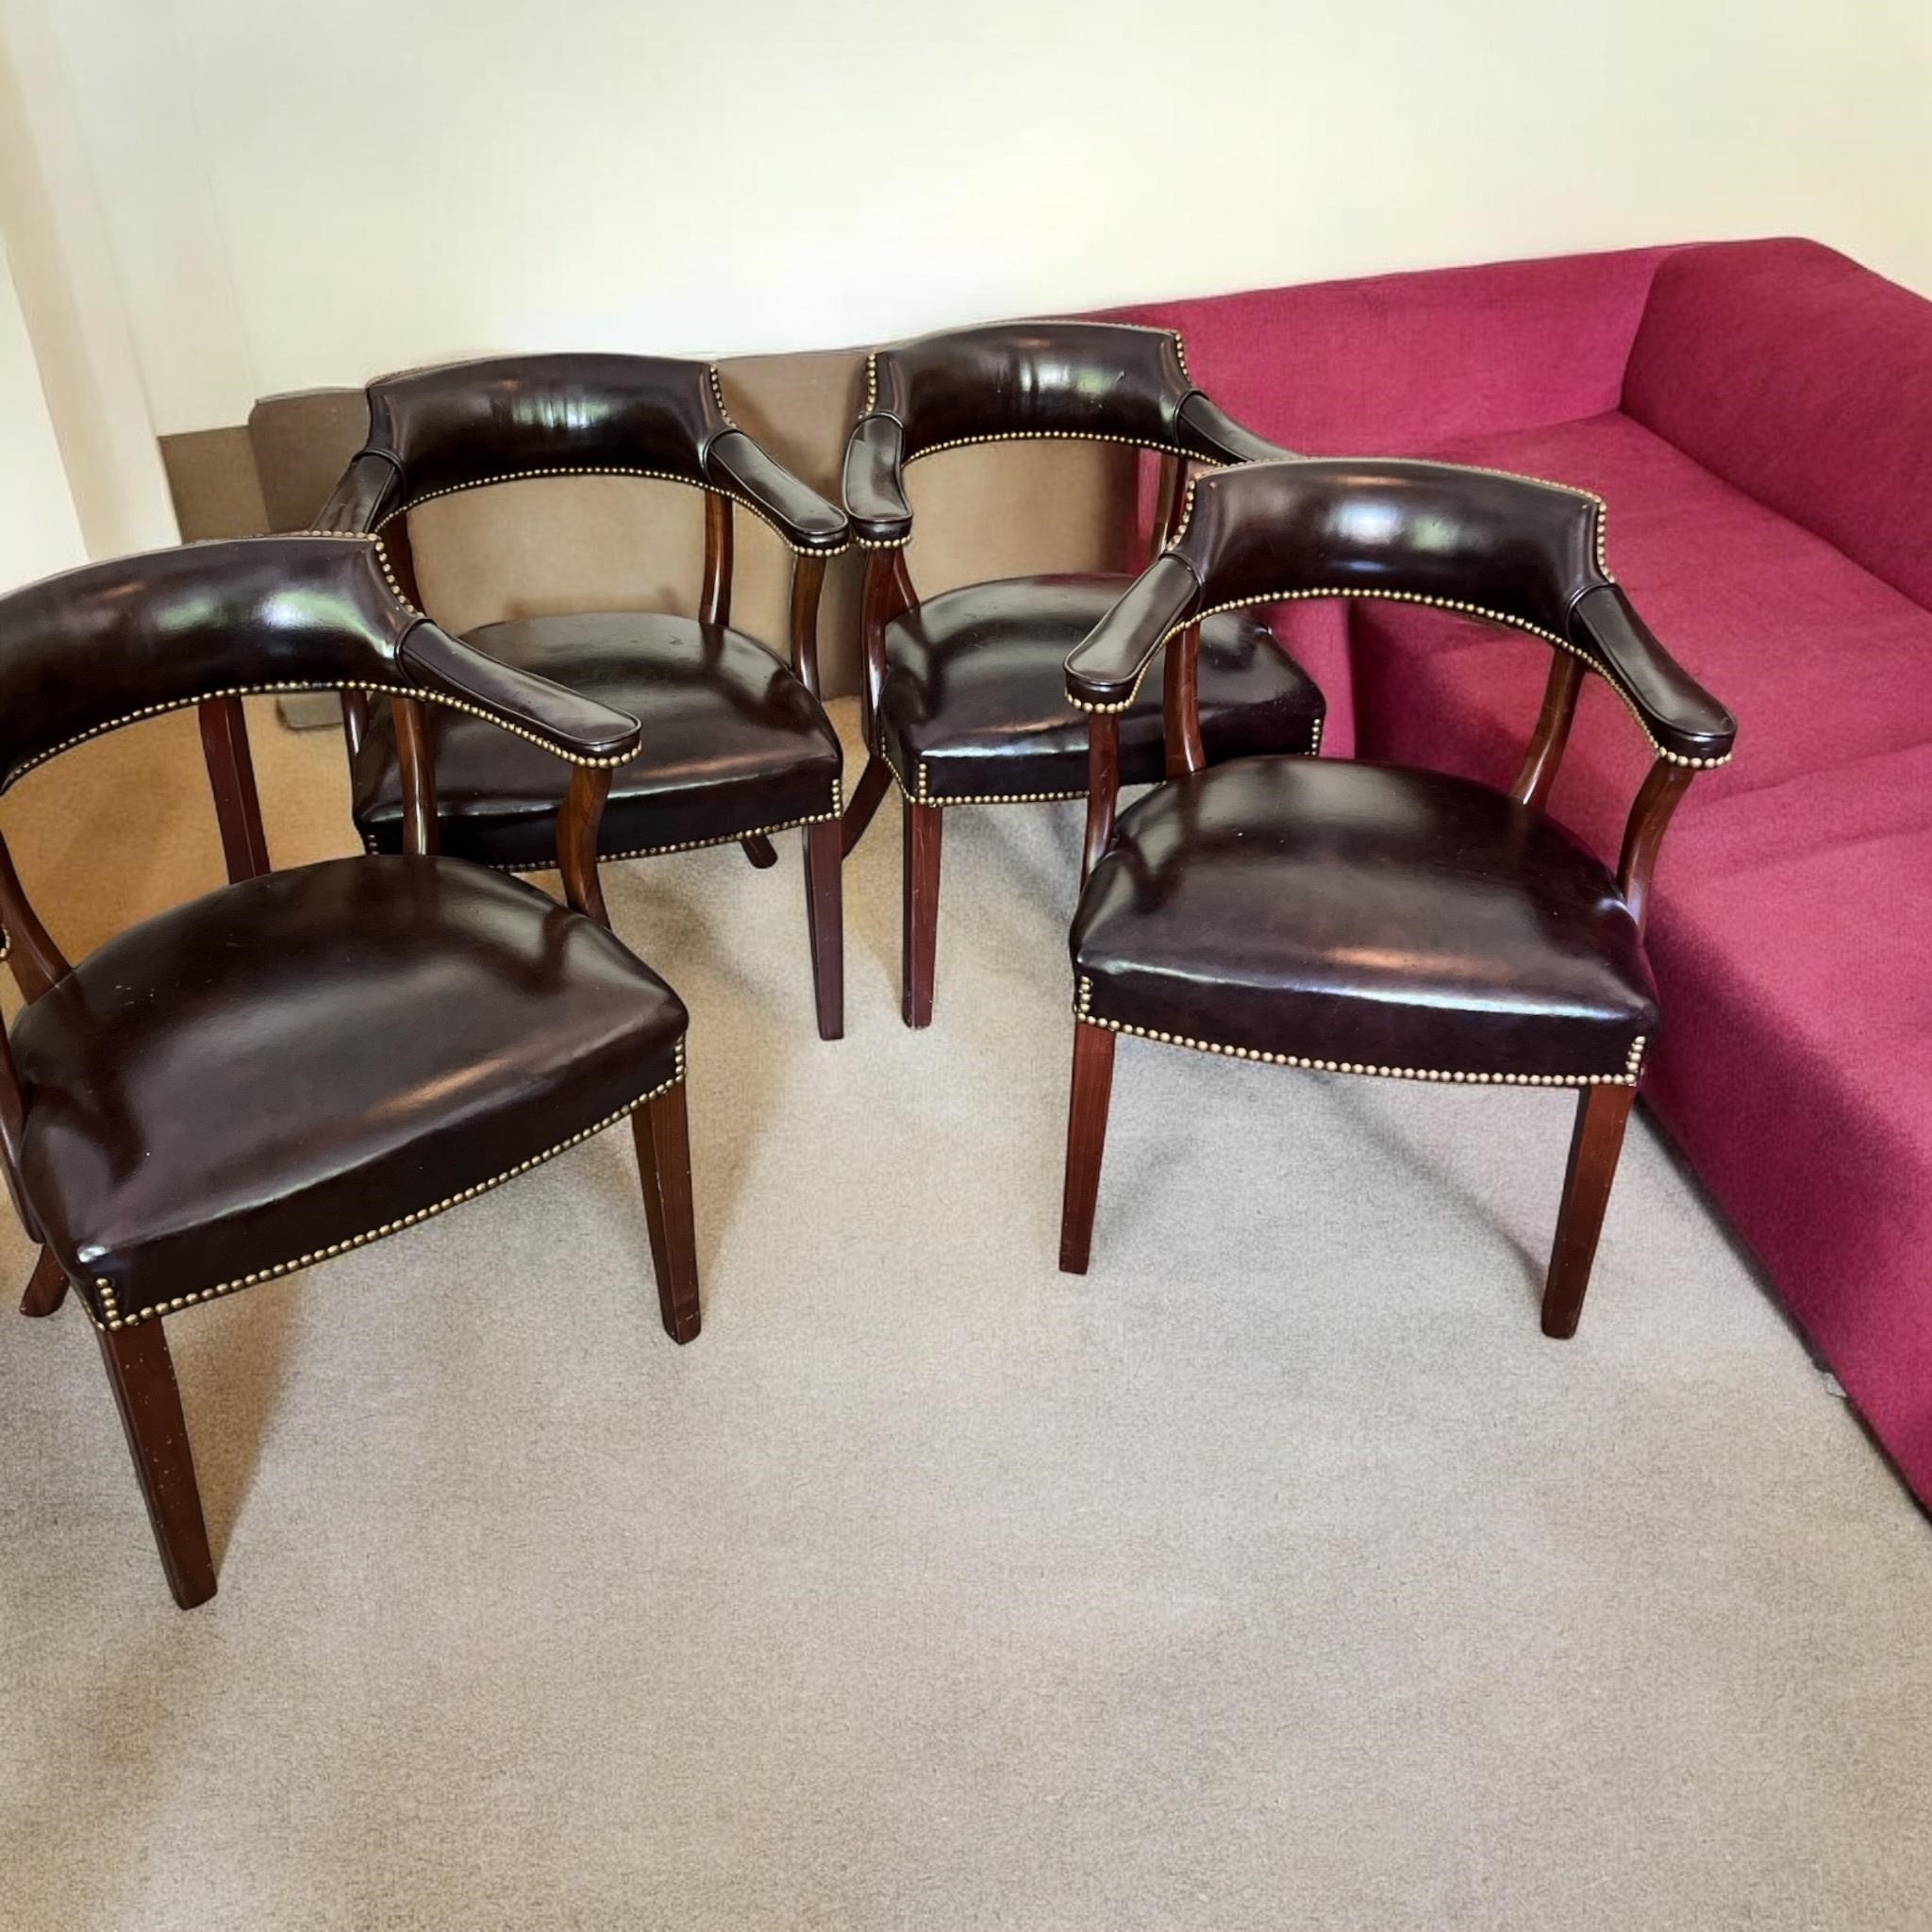 4 Leather Barrel Back Chairs by Gregson Mfg